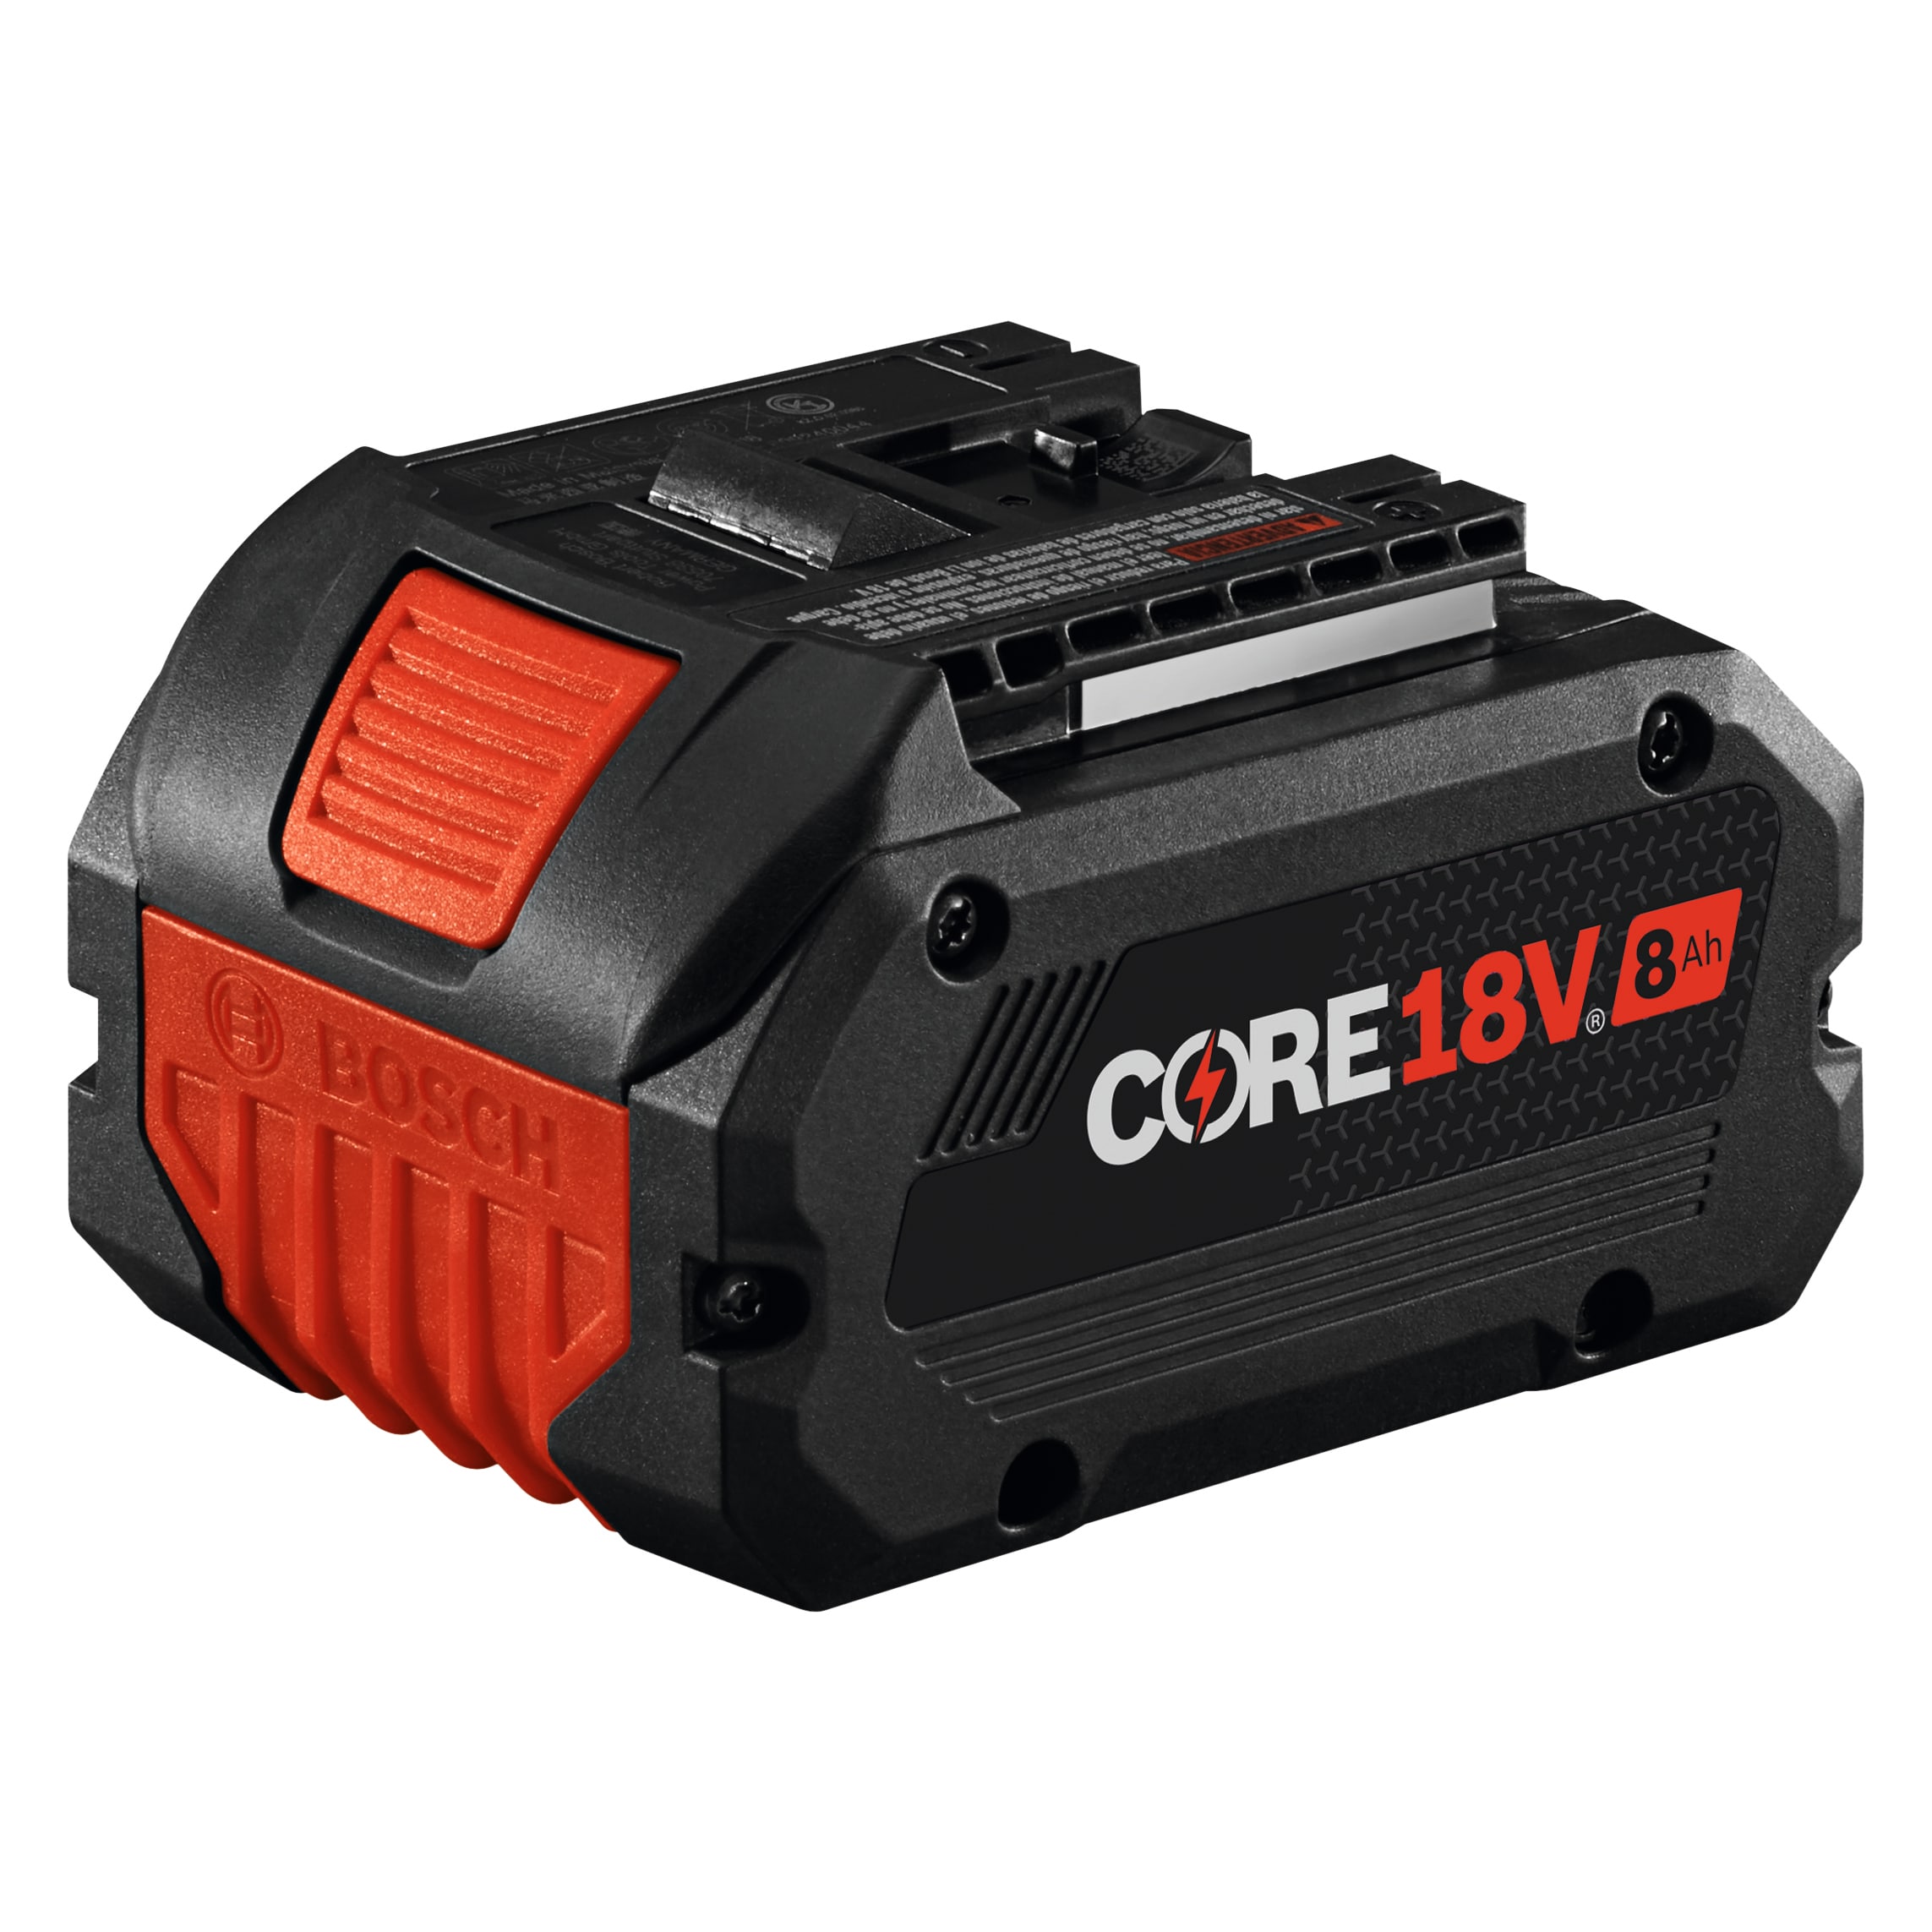 Bosch 18-V 8 Amp-Hour; Lithium-ion Battery in the Power Tool